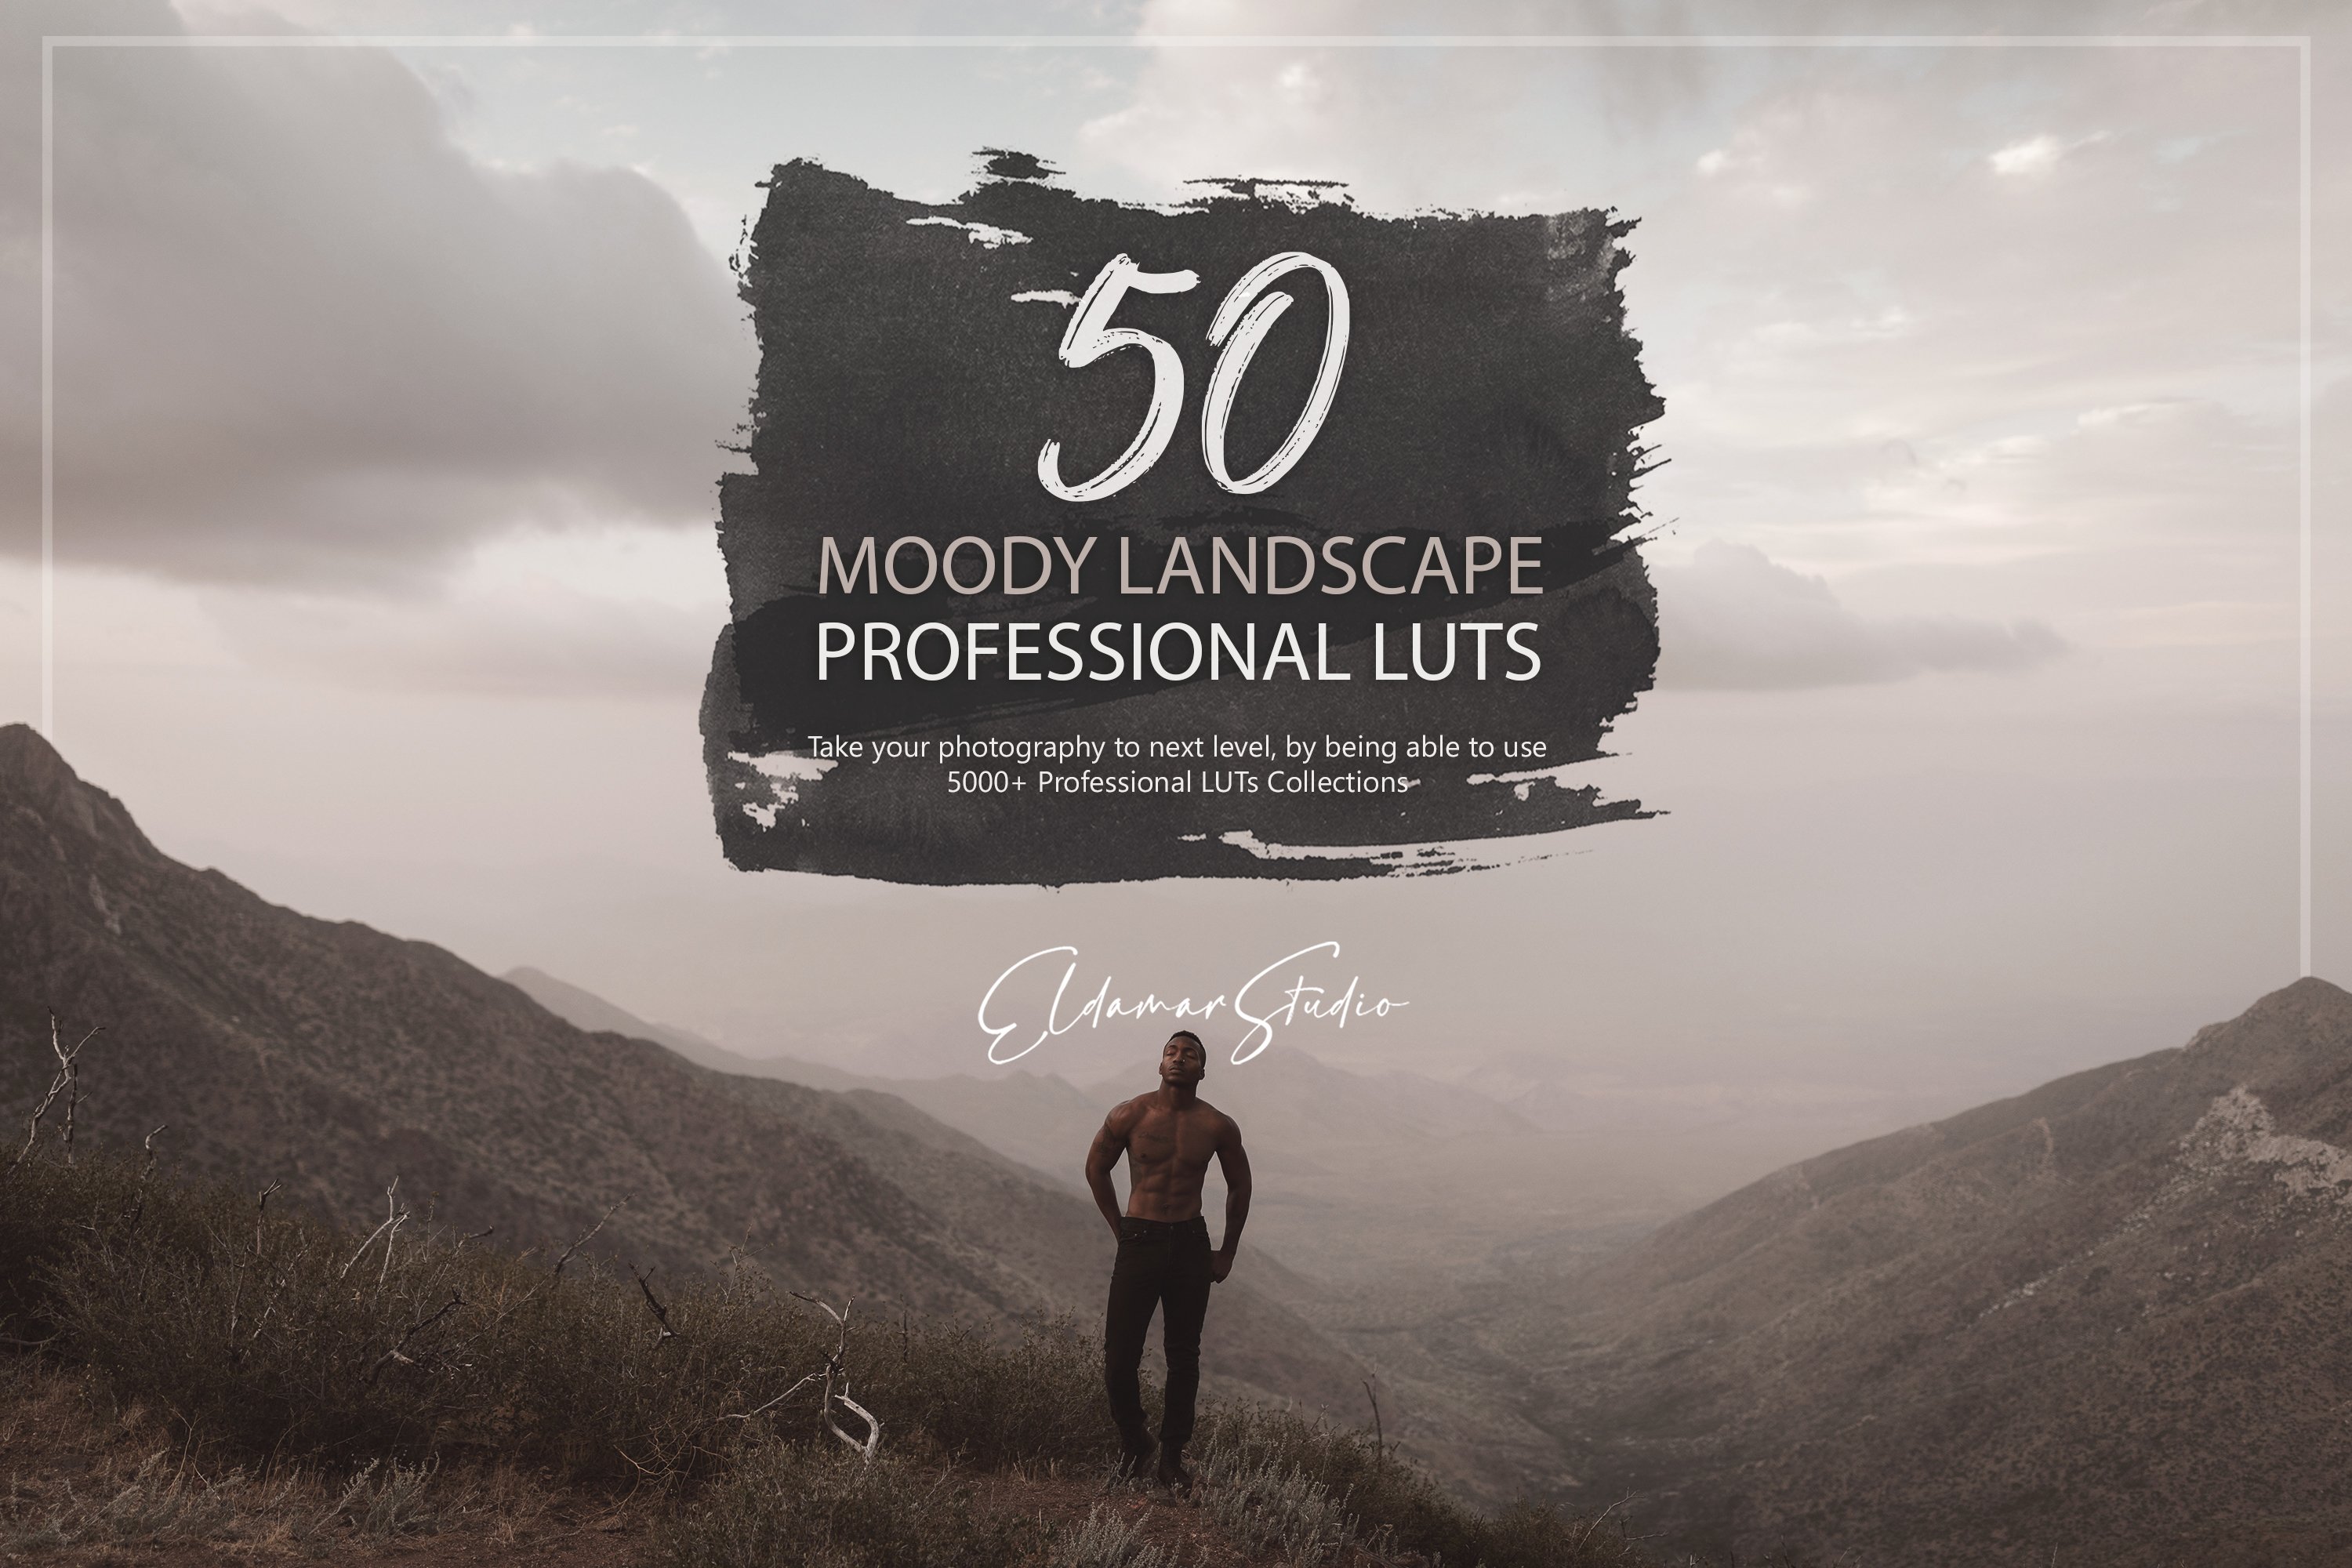 50 Moody Landscape LUTs Packcover image.